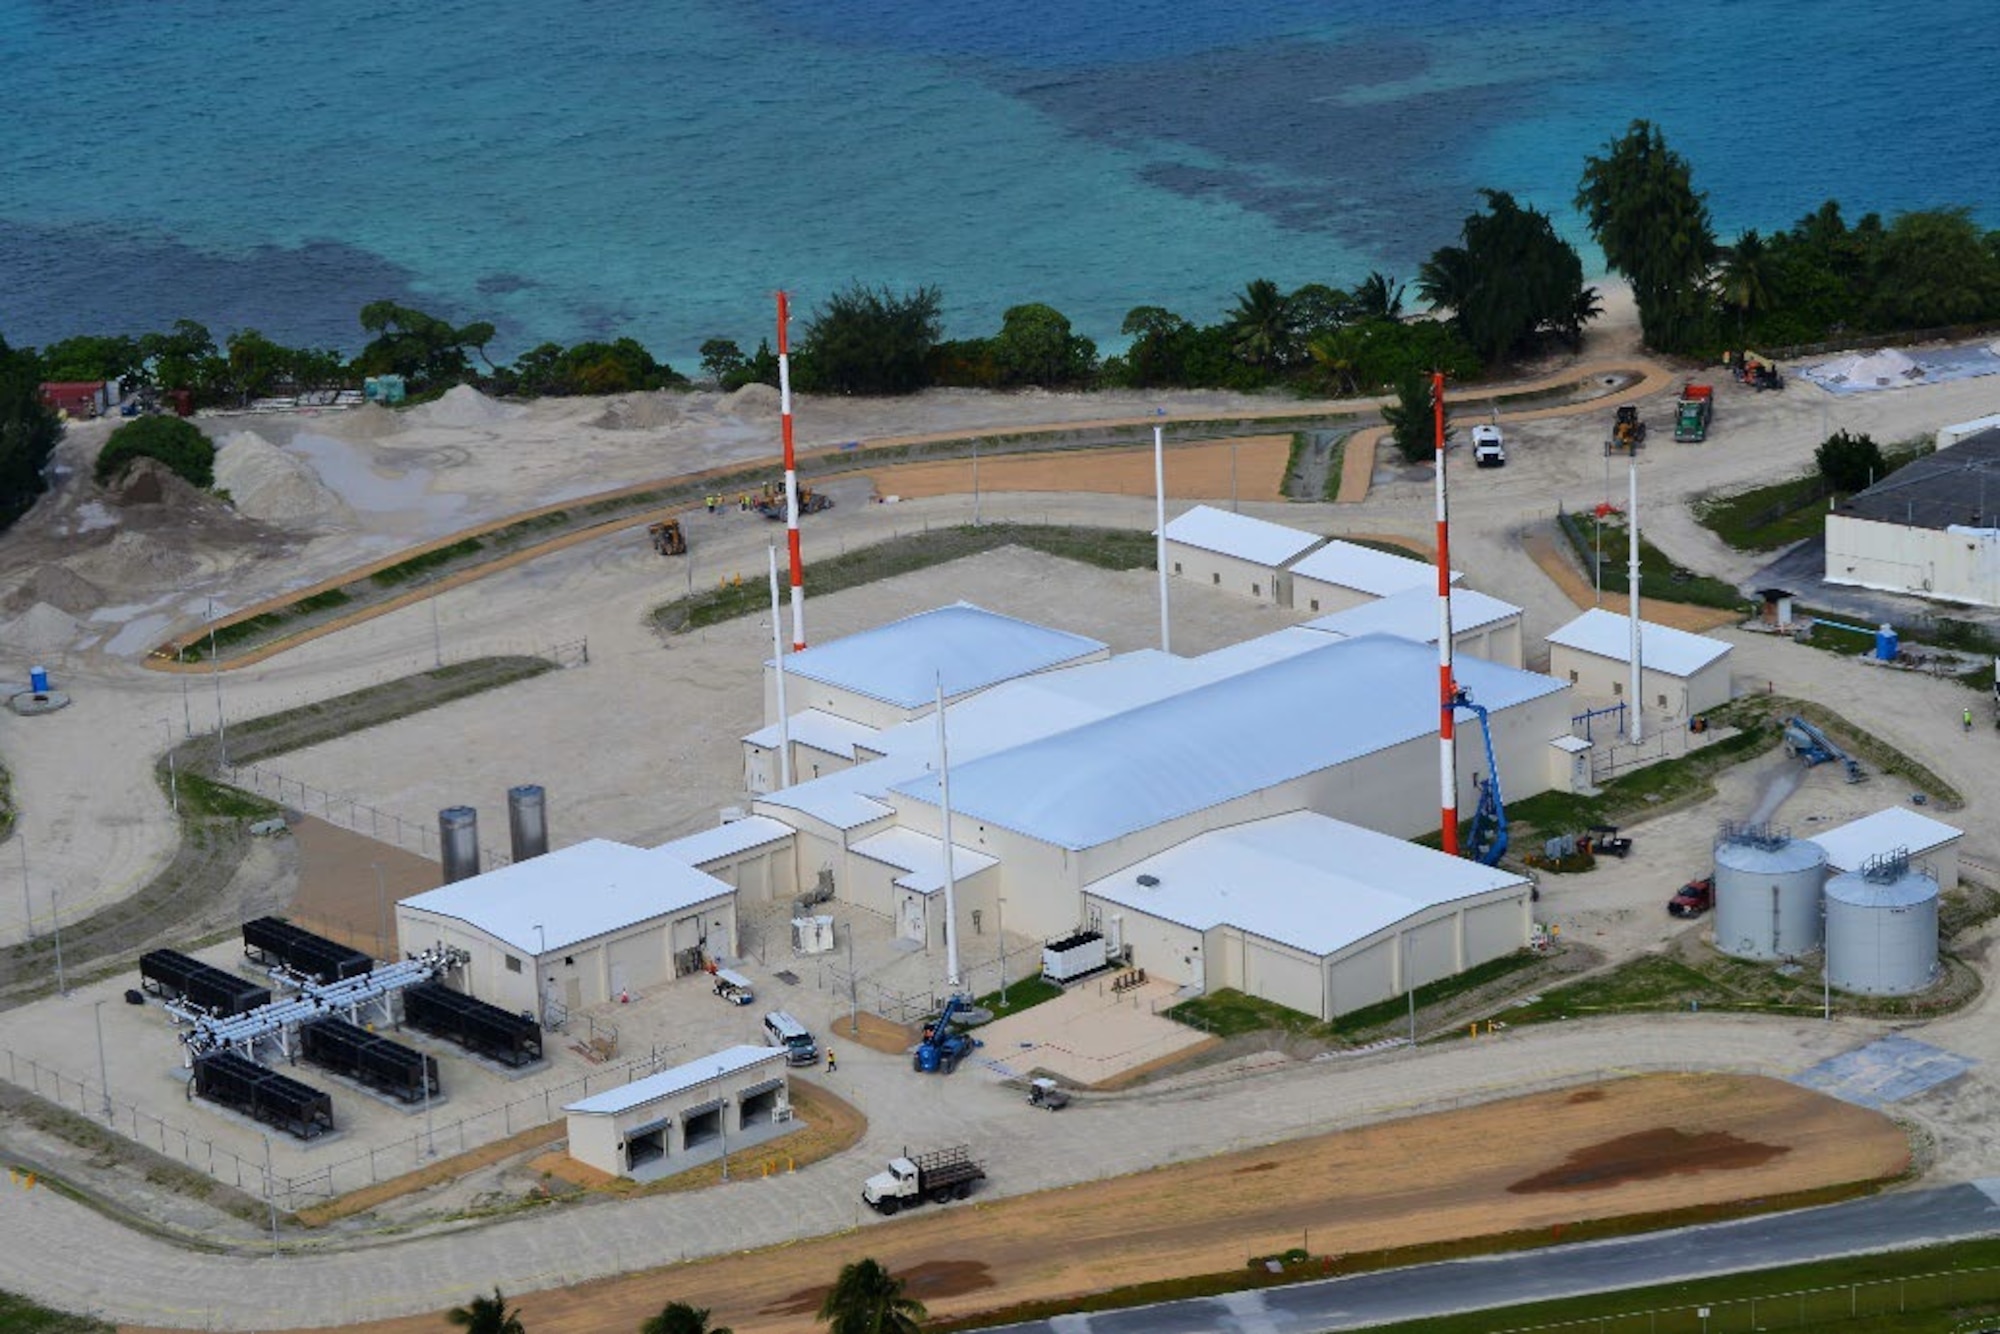 An Aerial view of the Space Fence facility located on Kwajalein Atoll.